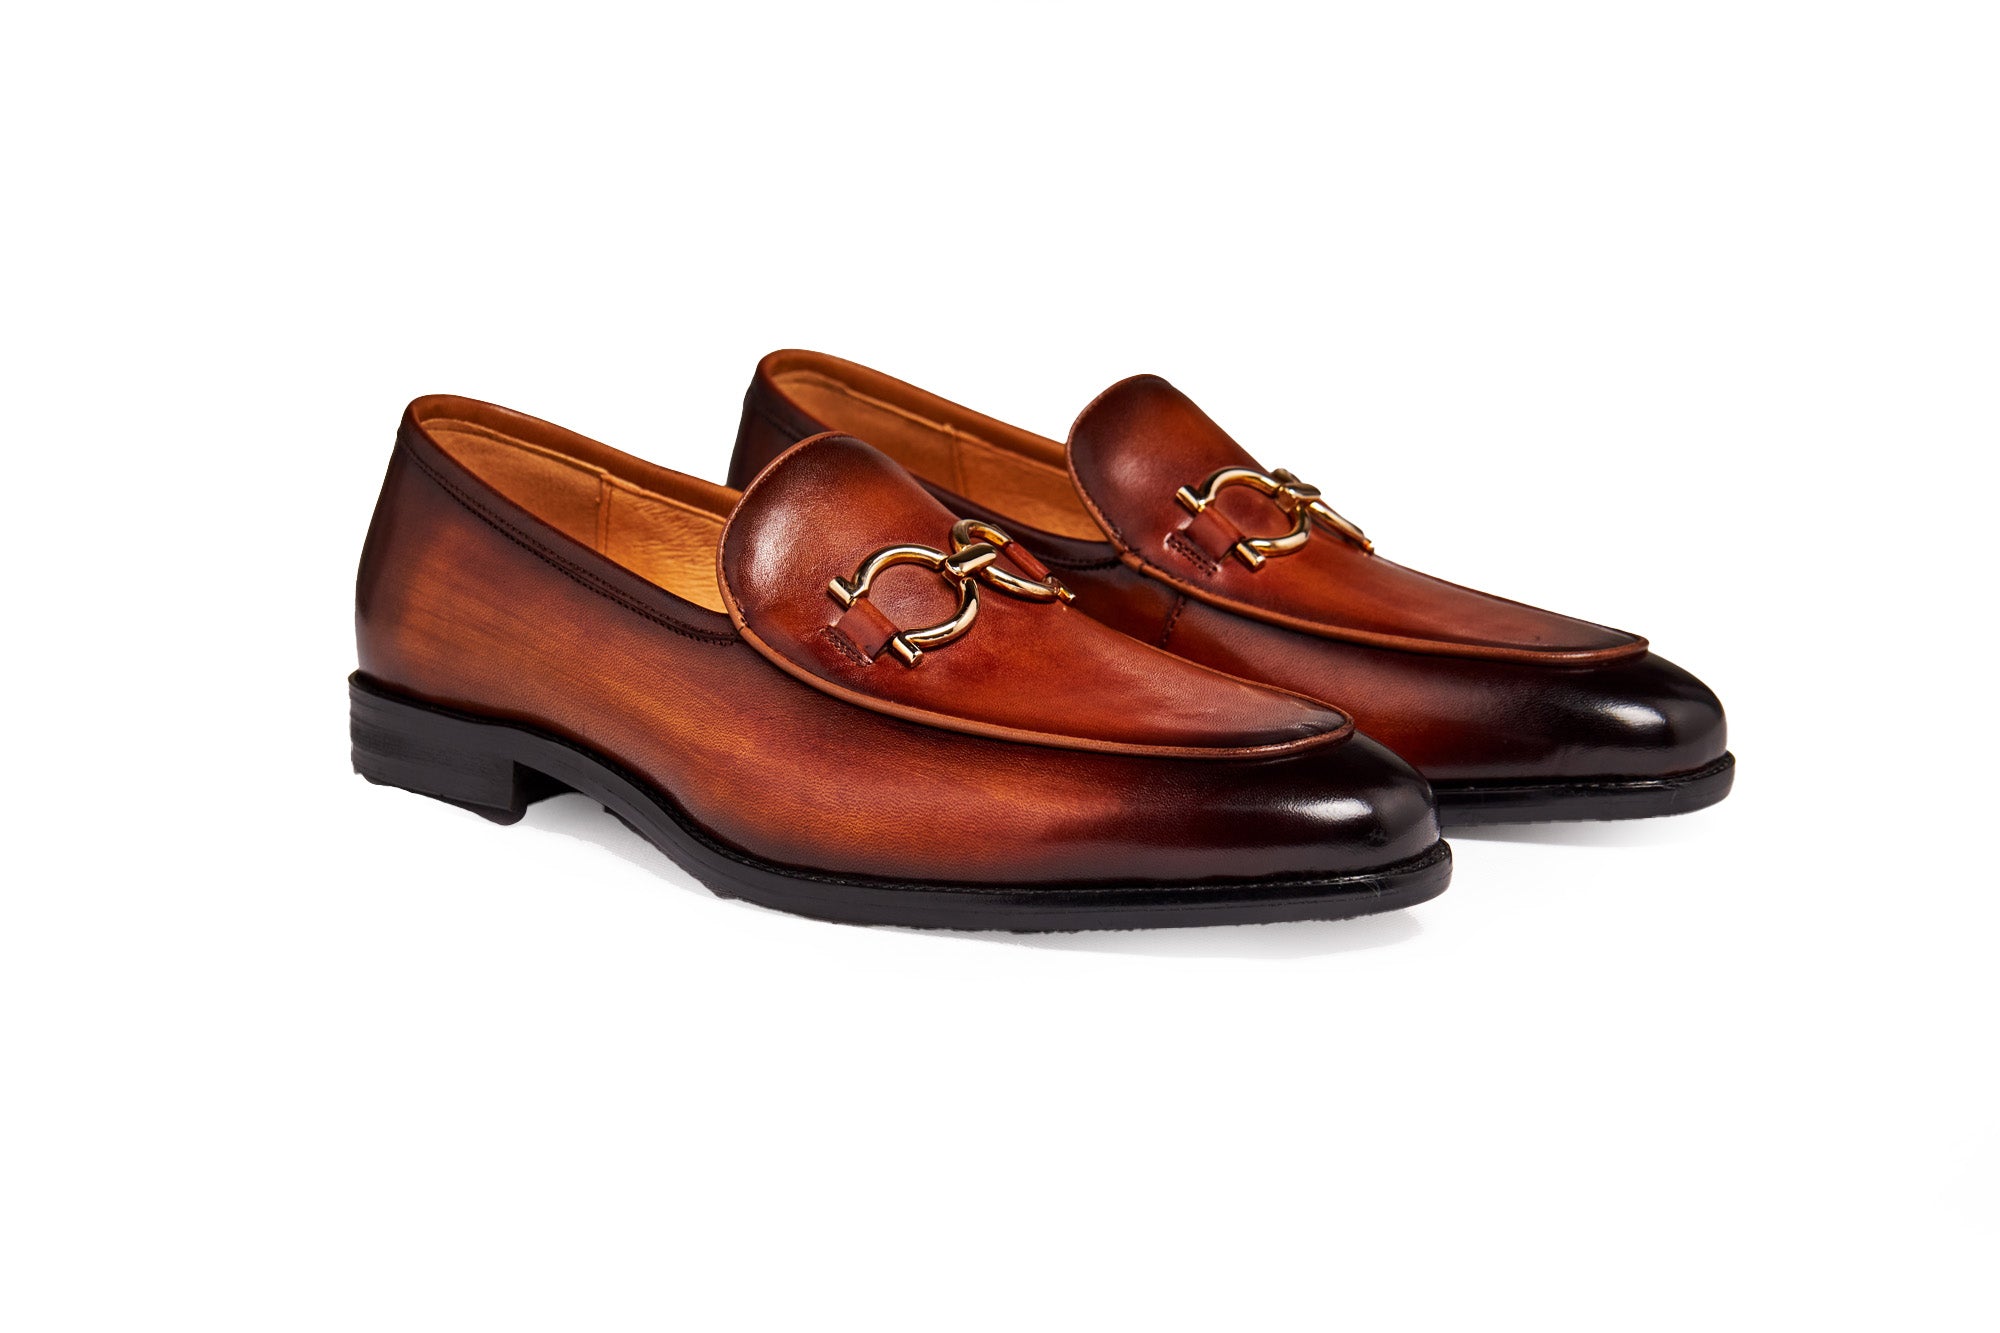 GOLD BUCKLE LOAFERS IN BROWN